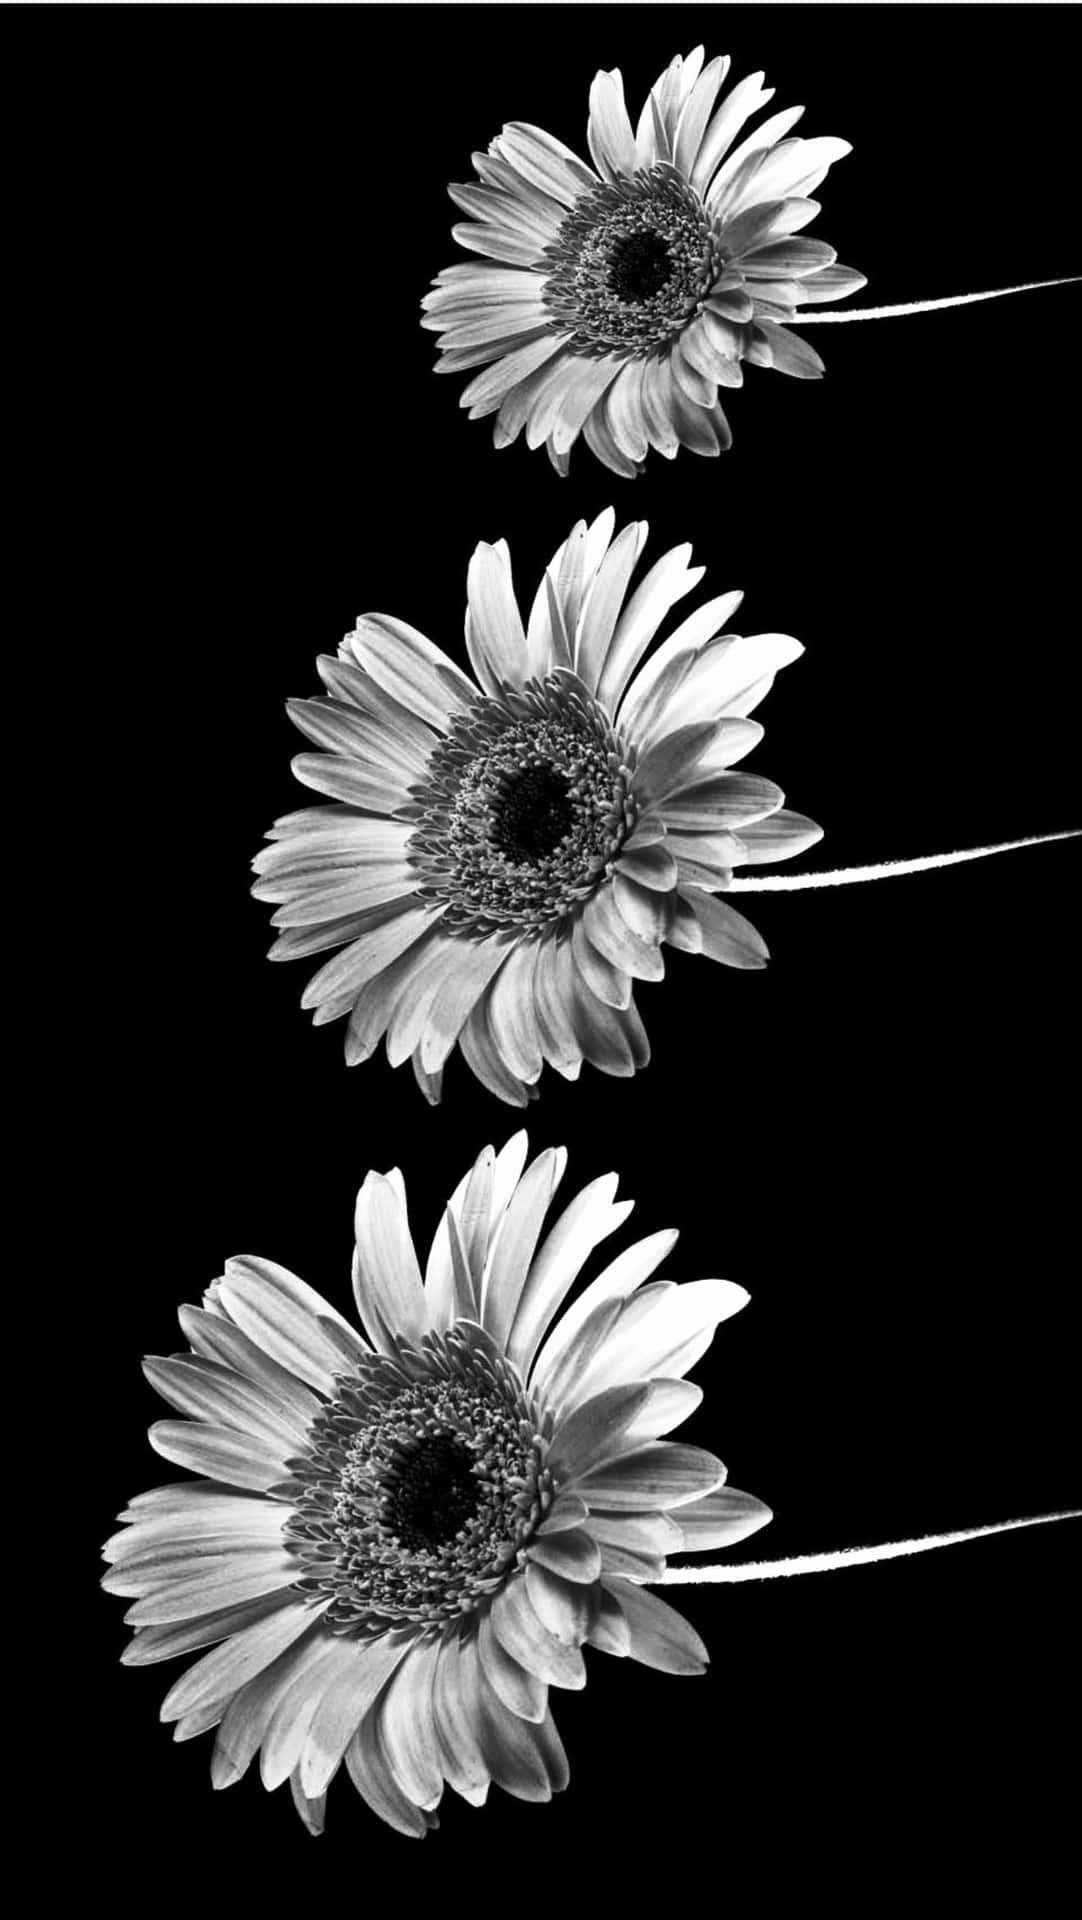 Free Black And White Aesthetic Phone Wallpaper Downloads, Black And White Aesthetic Phone Wallpaper for FREE